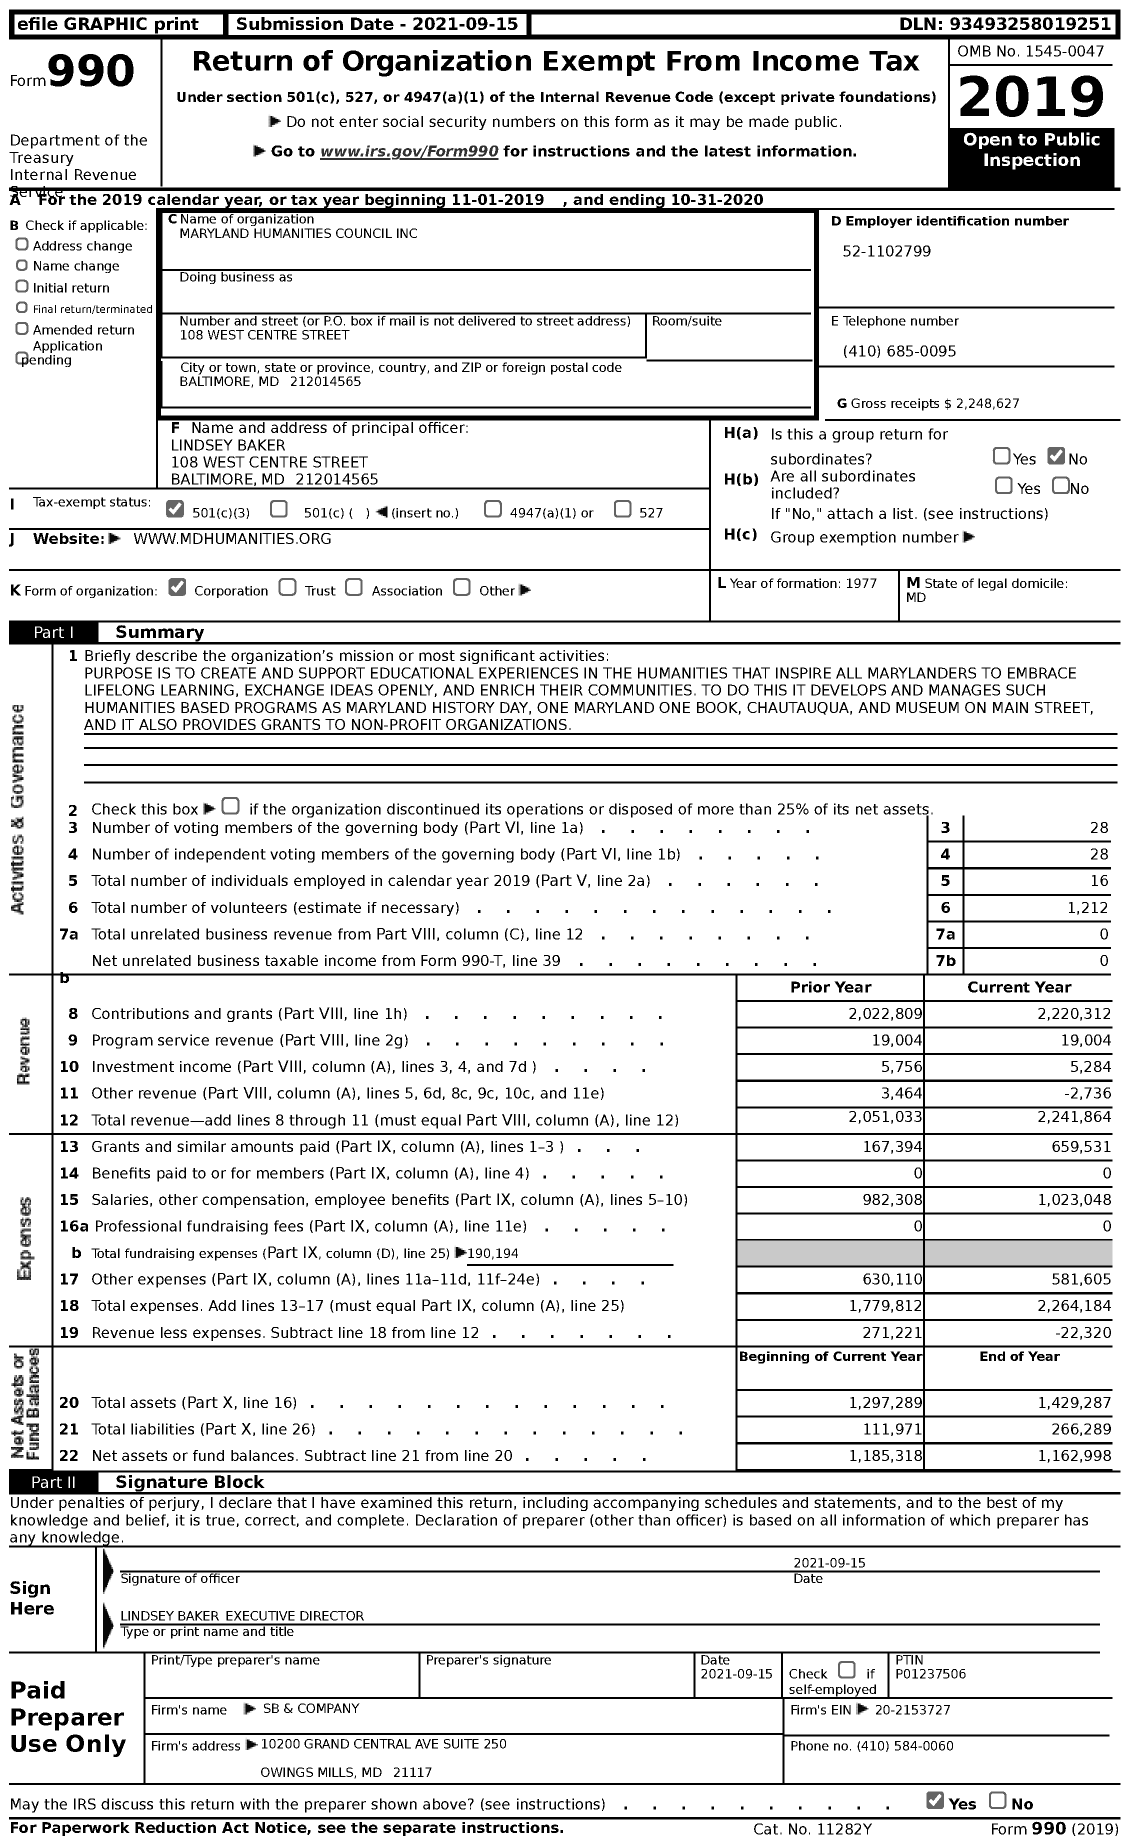 Image of first page of 2019 Form 990 for Maryland Humanities Council (MHC)